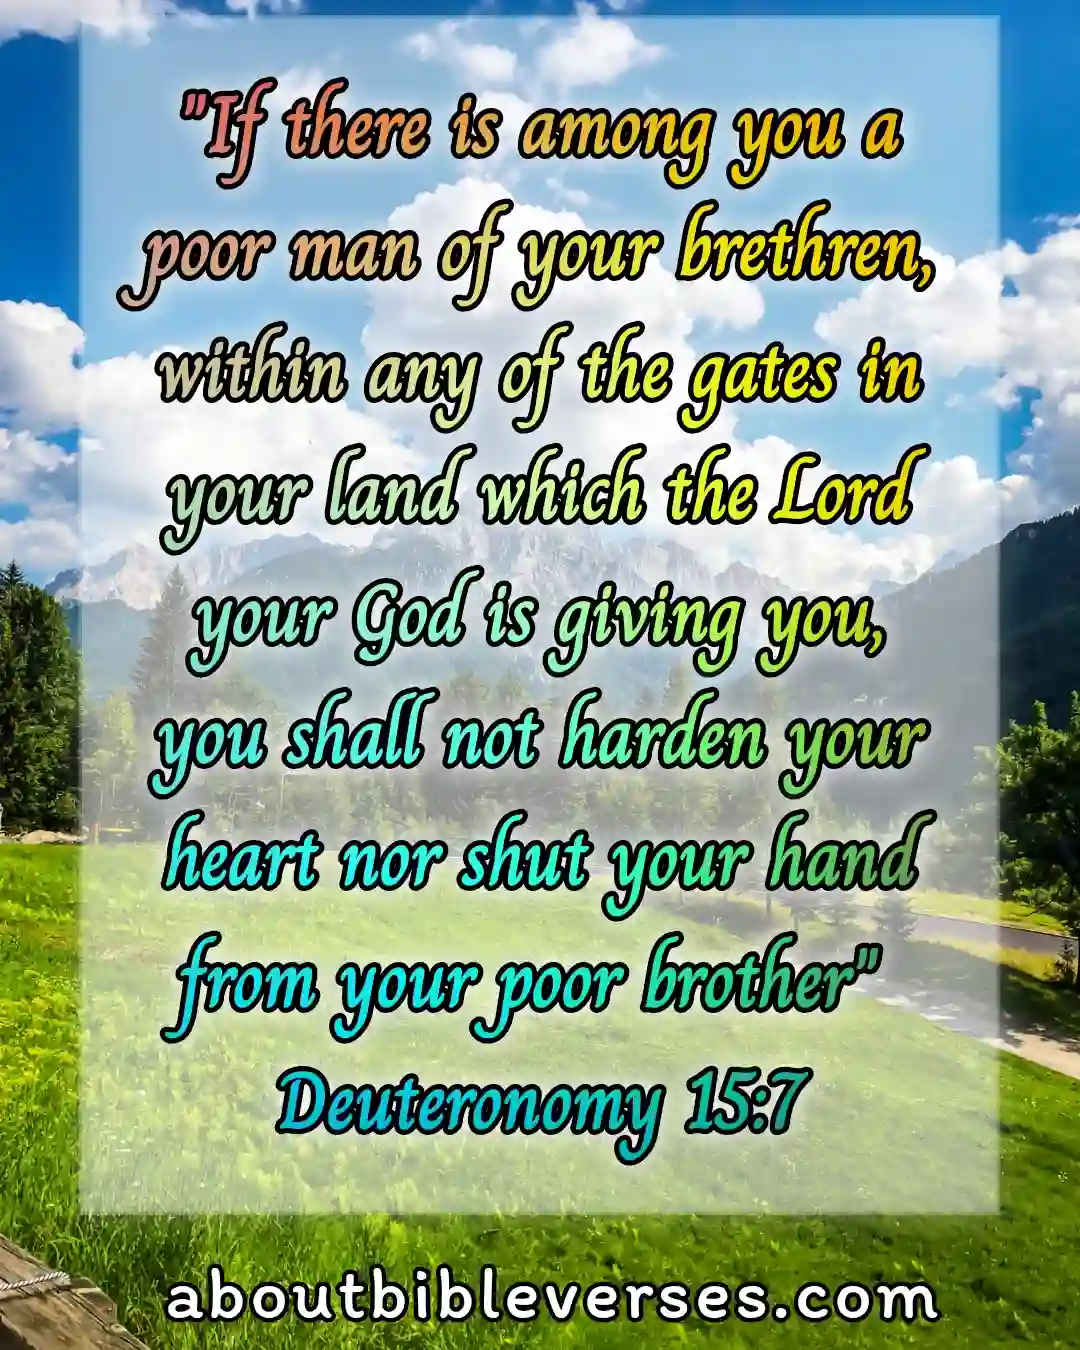 Bible Verse About Helping And Giving To The Poor (Deuteronomy 15:7)